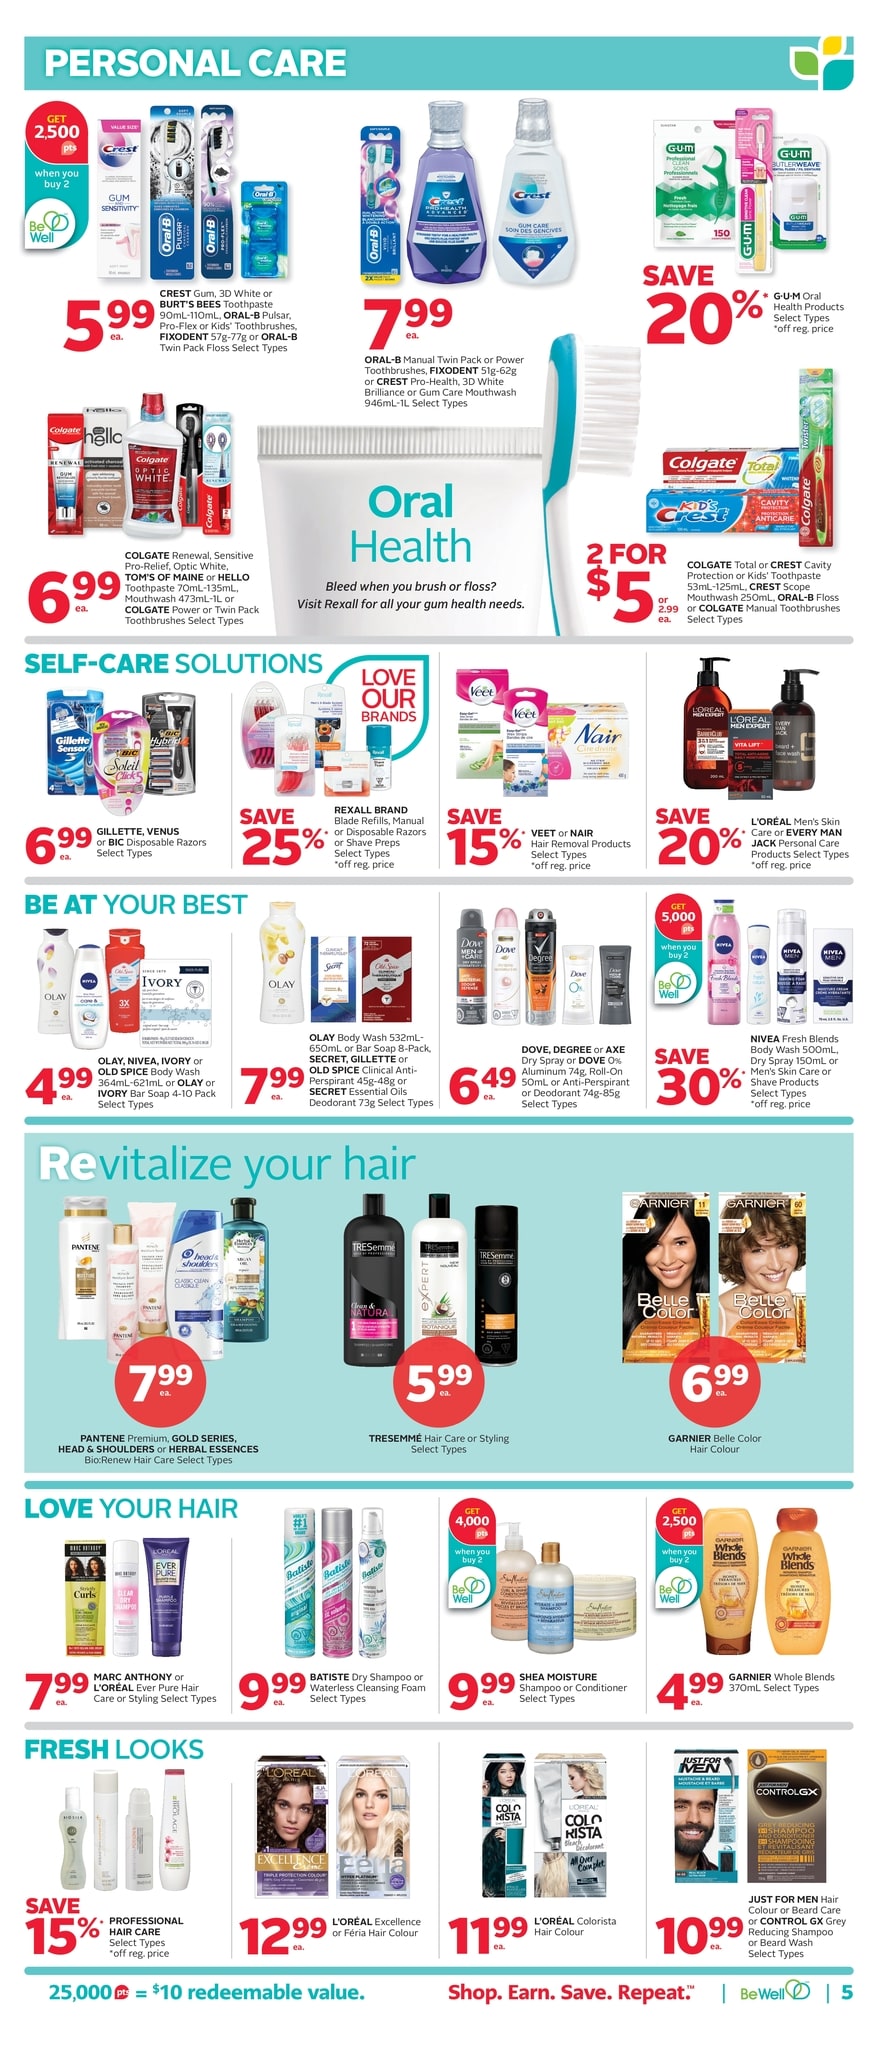 Rexall - Weekly Flyer Specials - Page 6